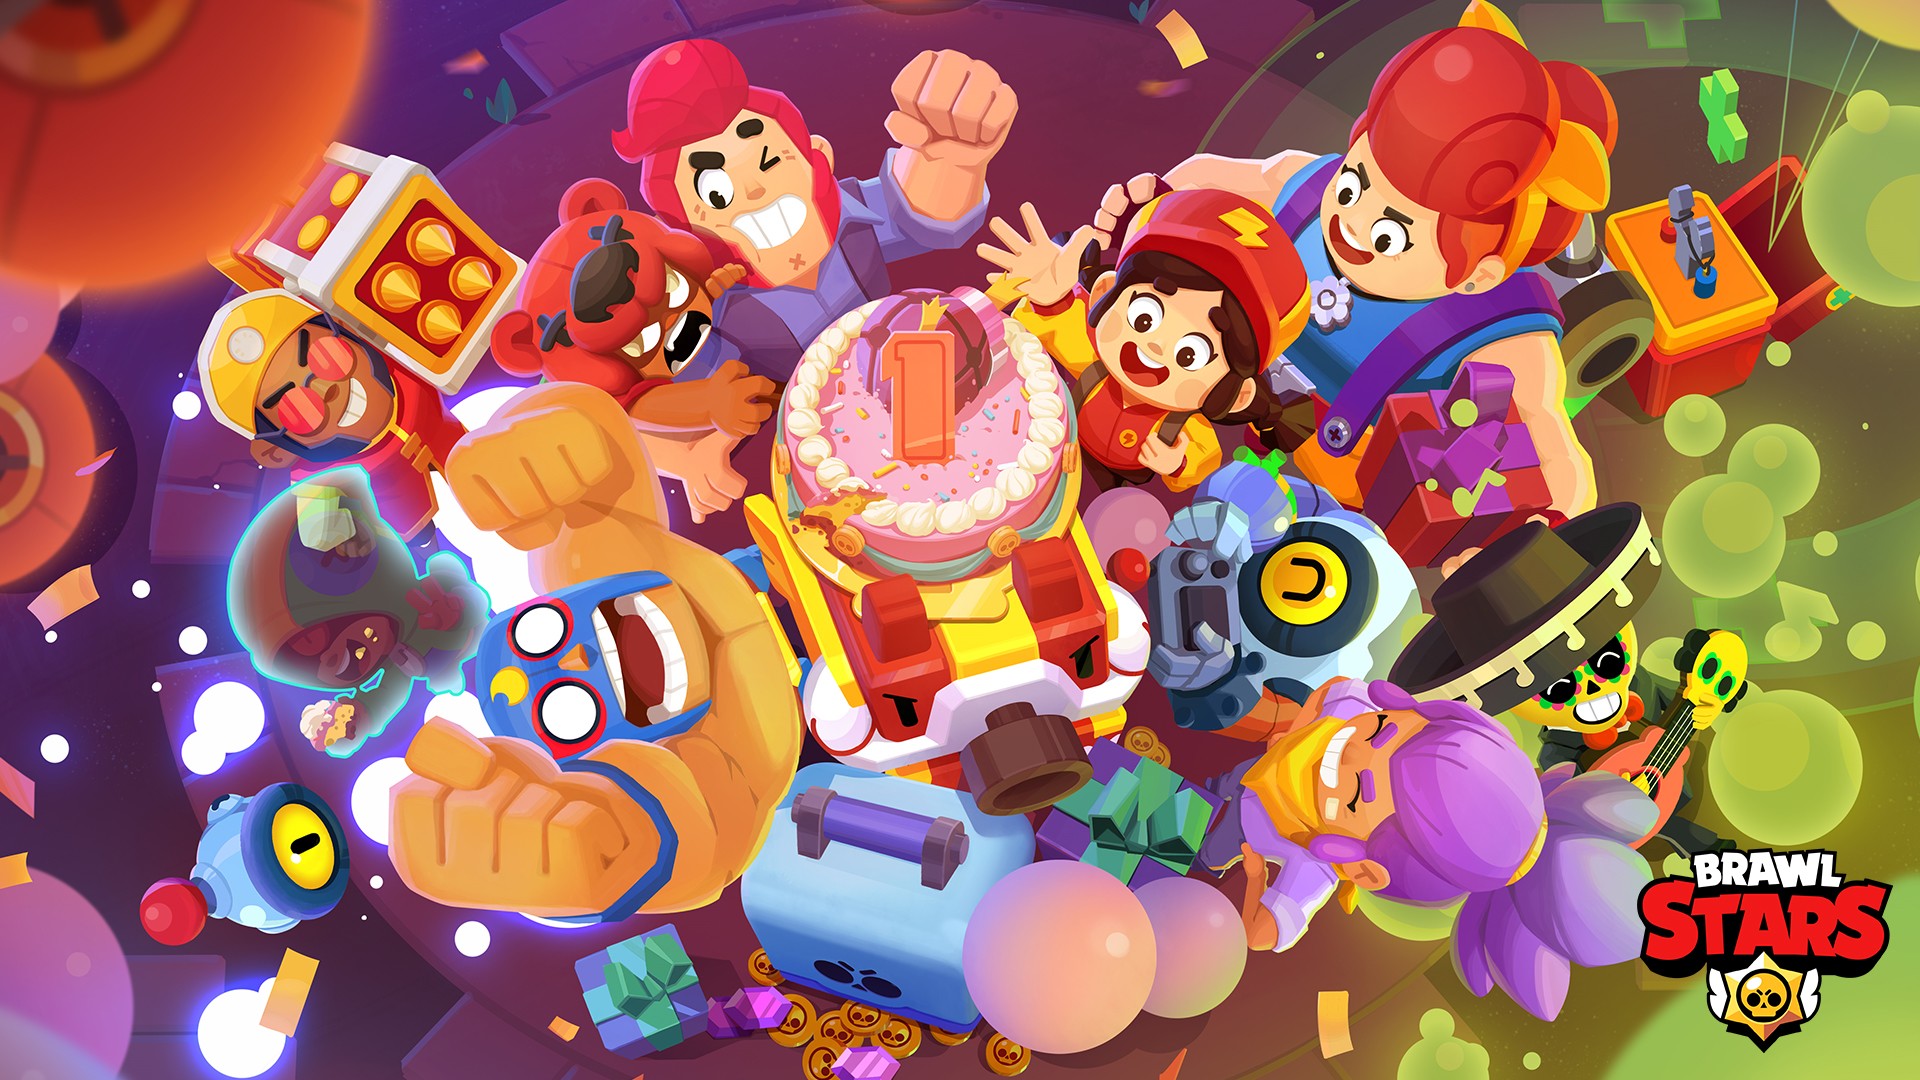 Free Boxes And Skins Up For Grabs In Brawl Stars To Celebrate One Year Anniversary Of China Release Dot Esports - can t buy gems in brawl stars